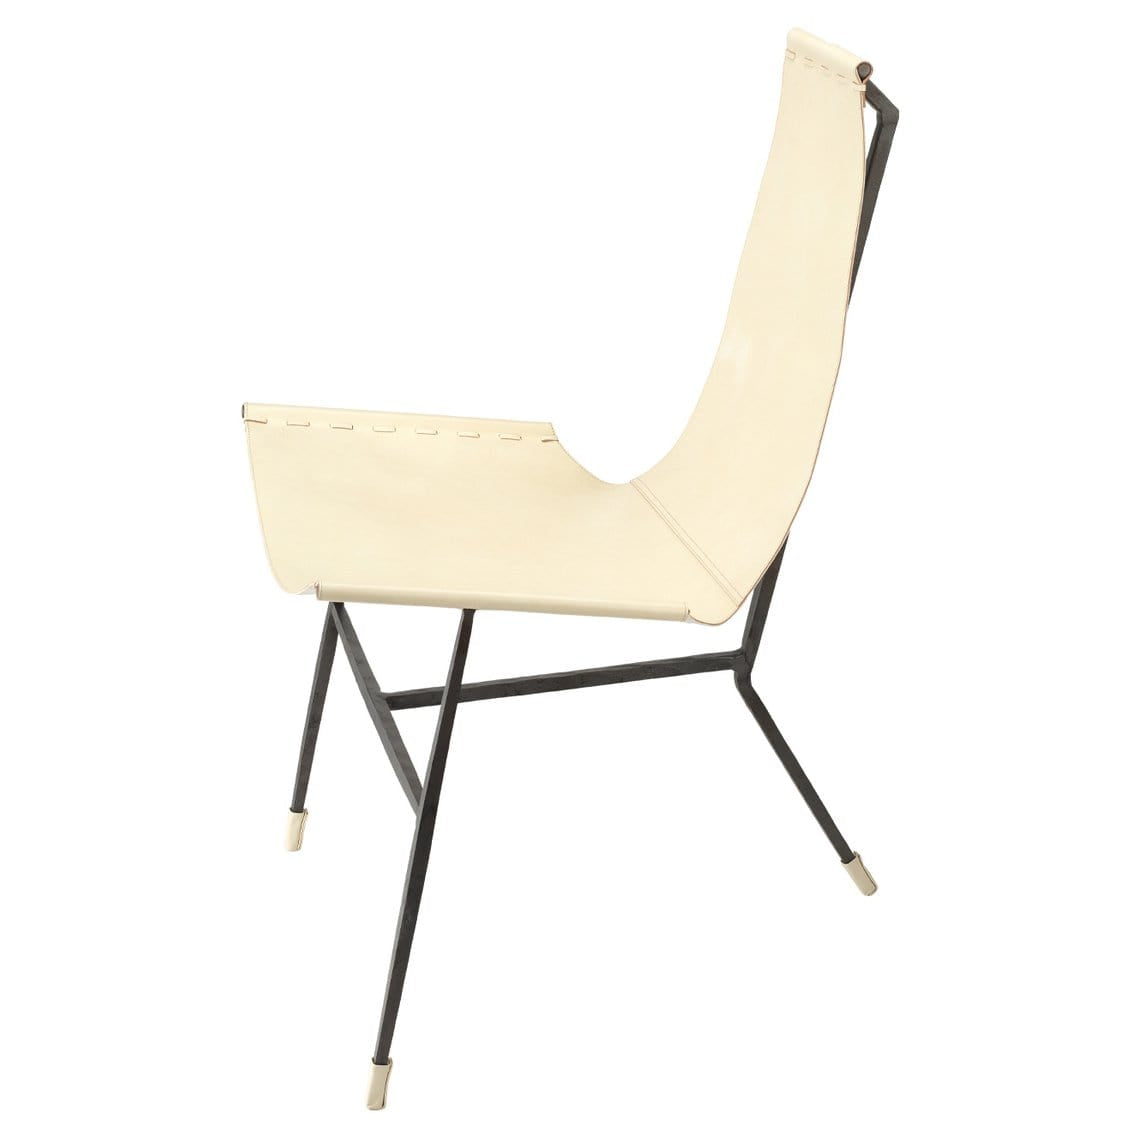 Jamie Young Co. Abilene Lounge Chair Furniture jamie-young-20ABIL-CHWH